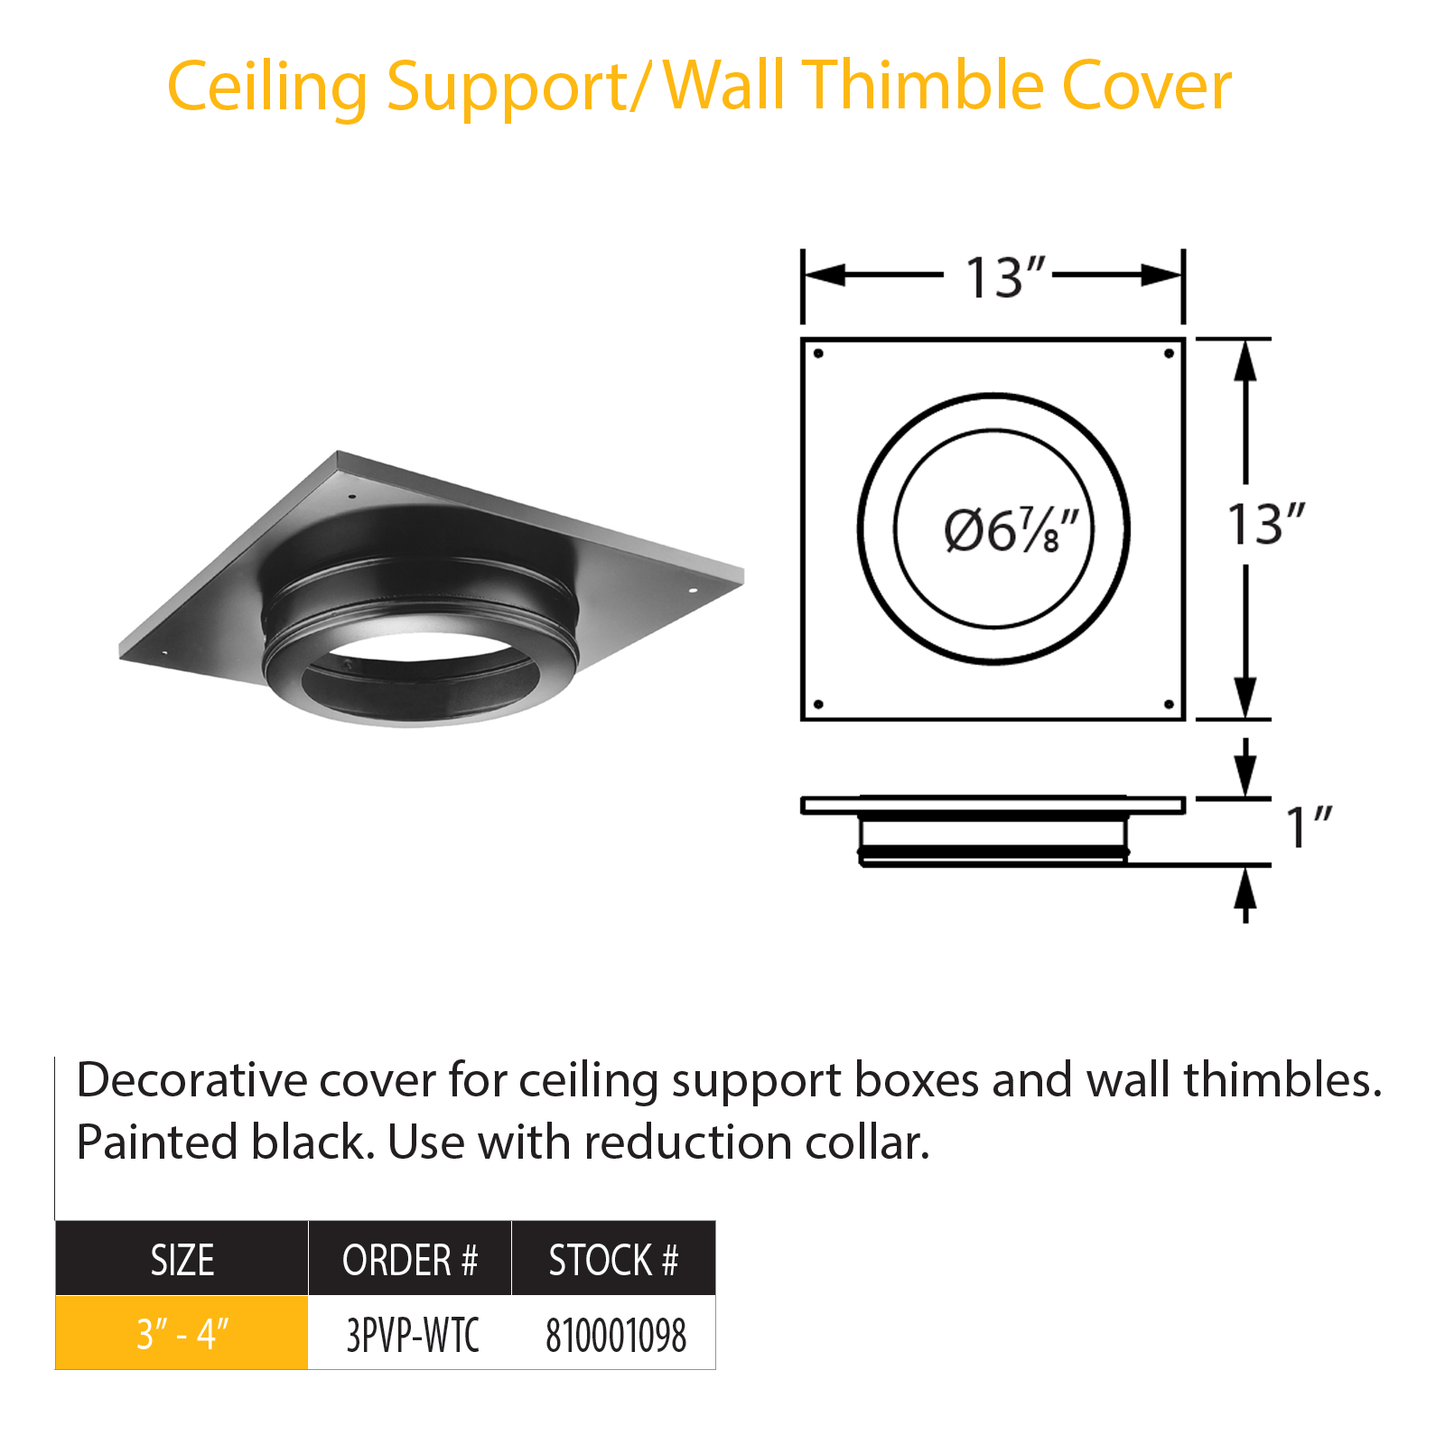 DuraVent Pellet Vent Pro Ceiling Support/Wall Thimble Cover | 3PVP-WTC